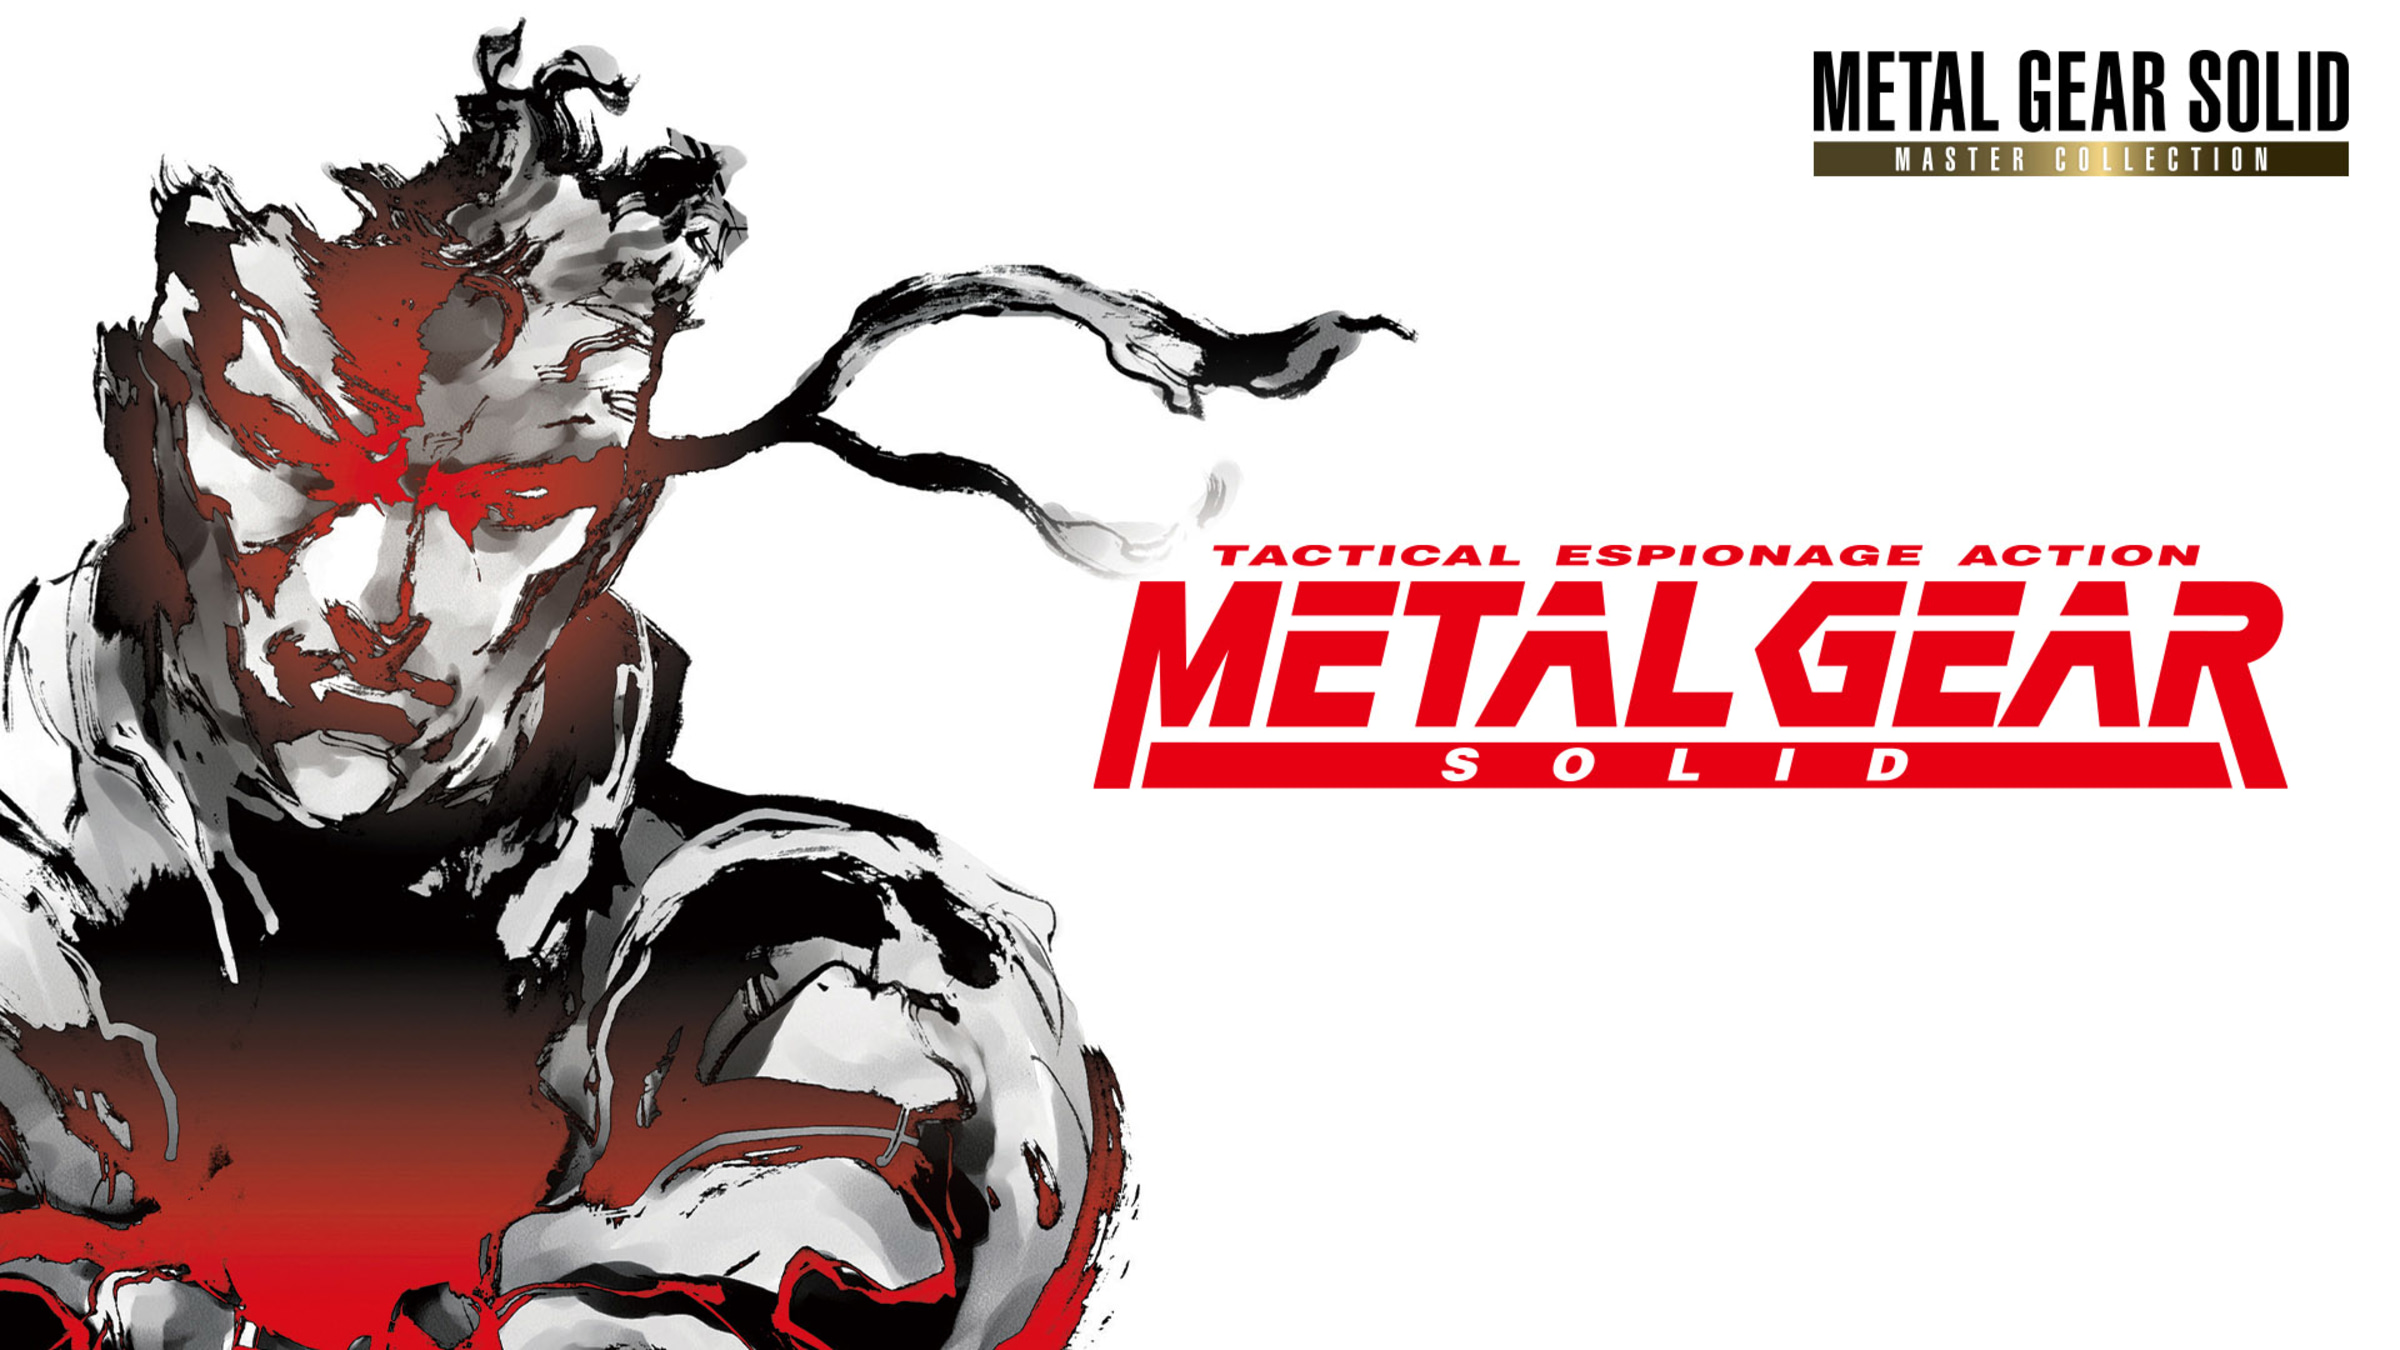 METAL GEAR OFFICIAL on X: METAL GEAR SOLID: MASTER COLLECTION Vol.1 will  have physical editions for Nintendo Switch™, PlayStation®5, and Xbox Series  X Details:  #MGSVol1 #MG35th   / X